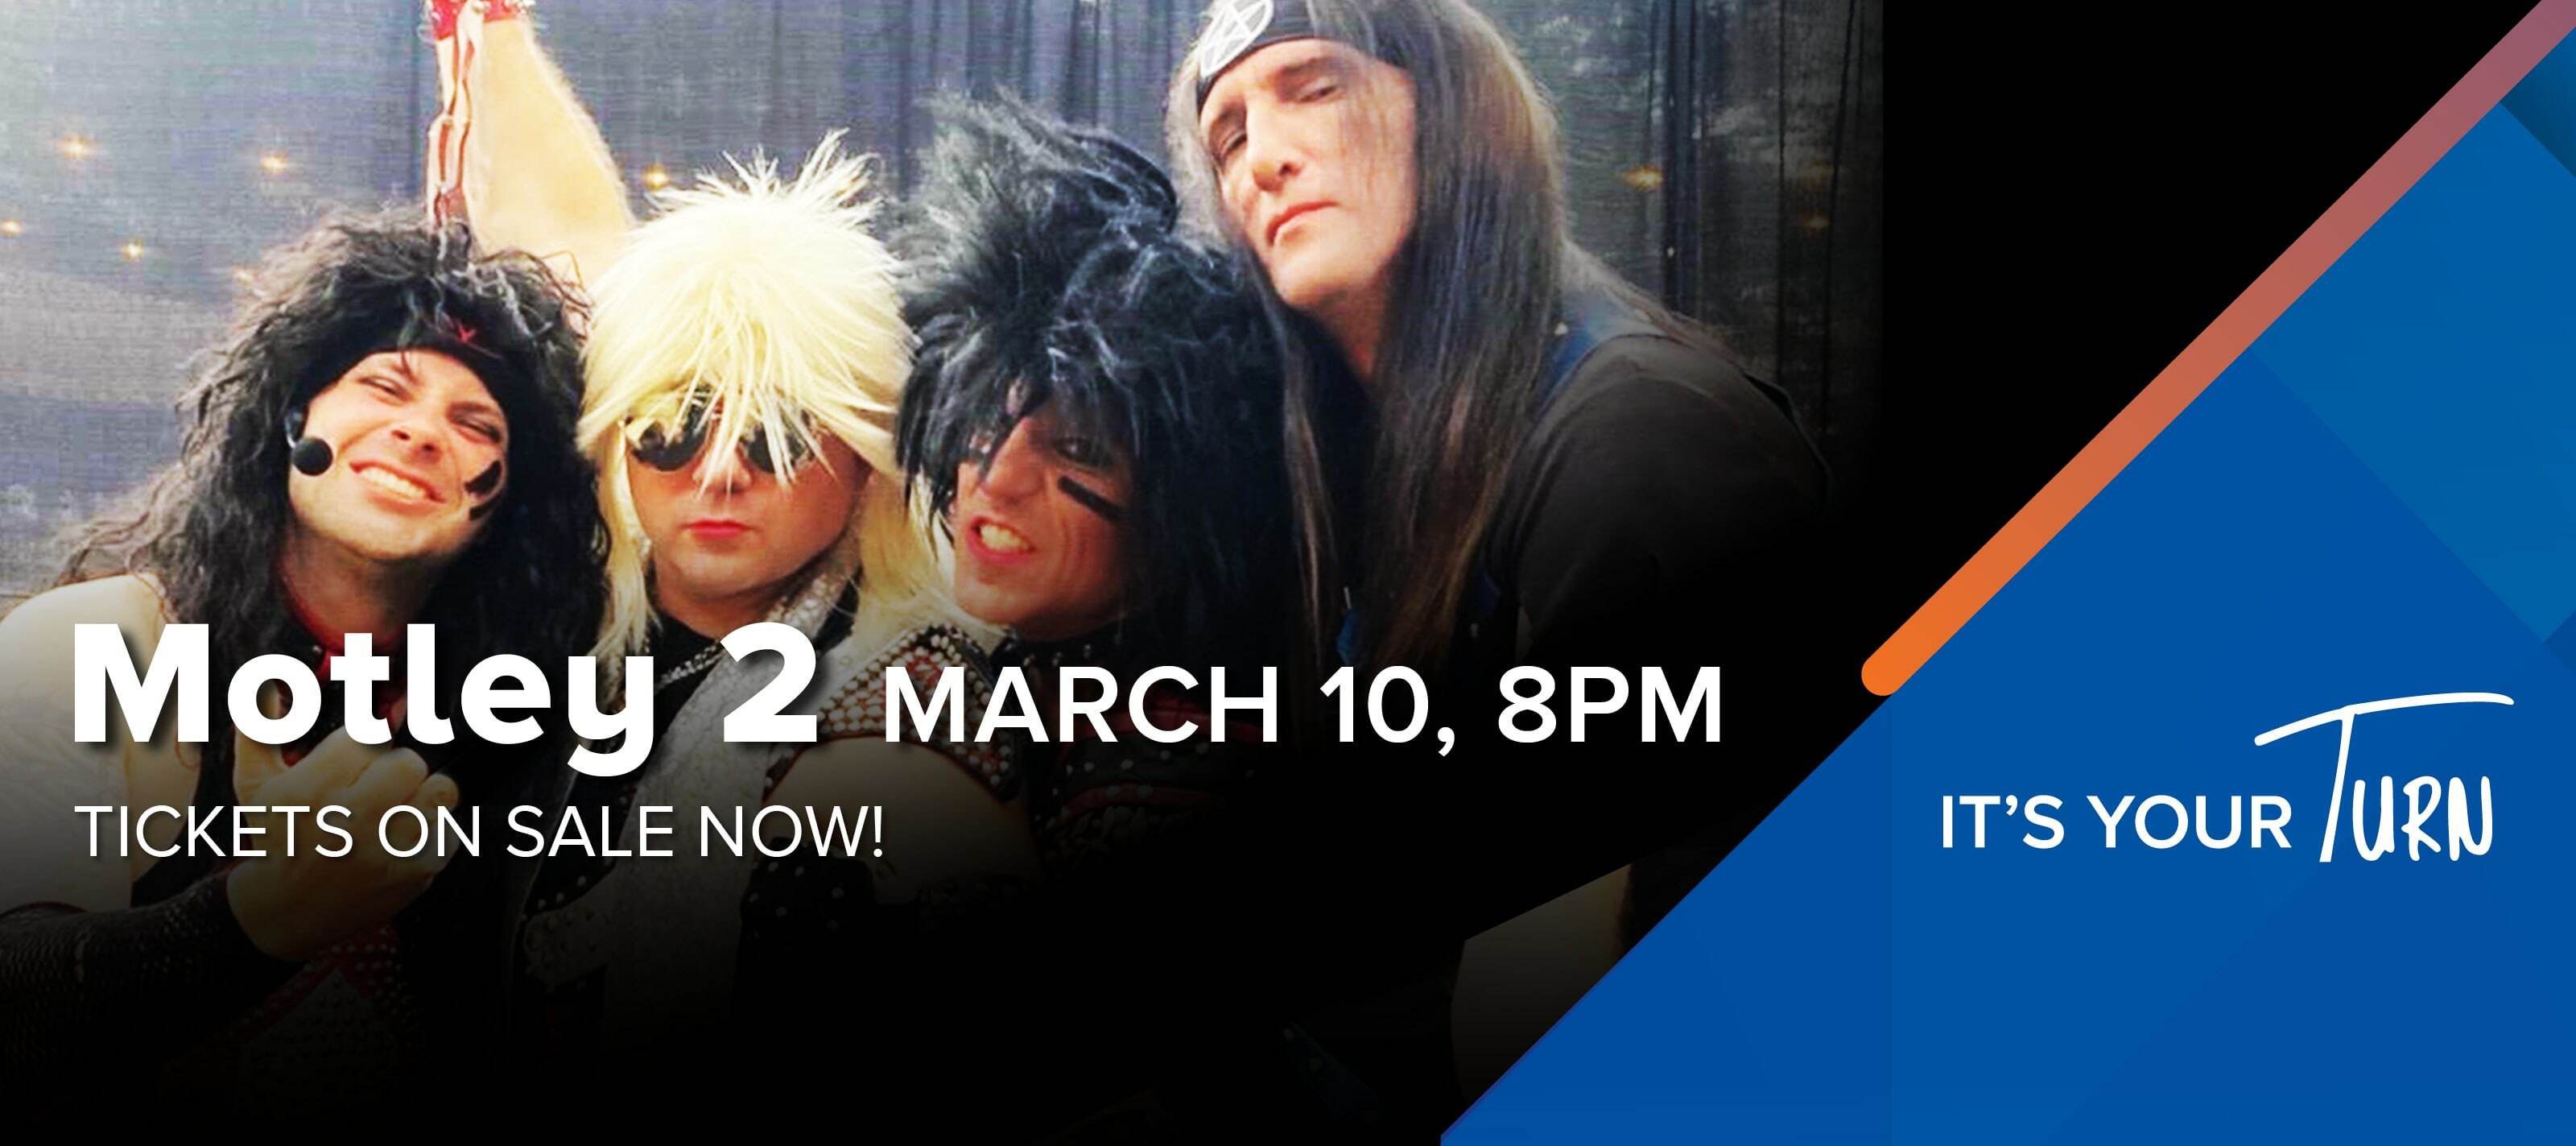 Motley 2 March 10 8pm Tickets On Sale Now